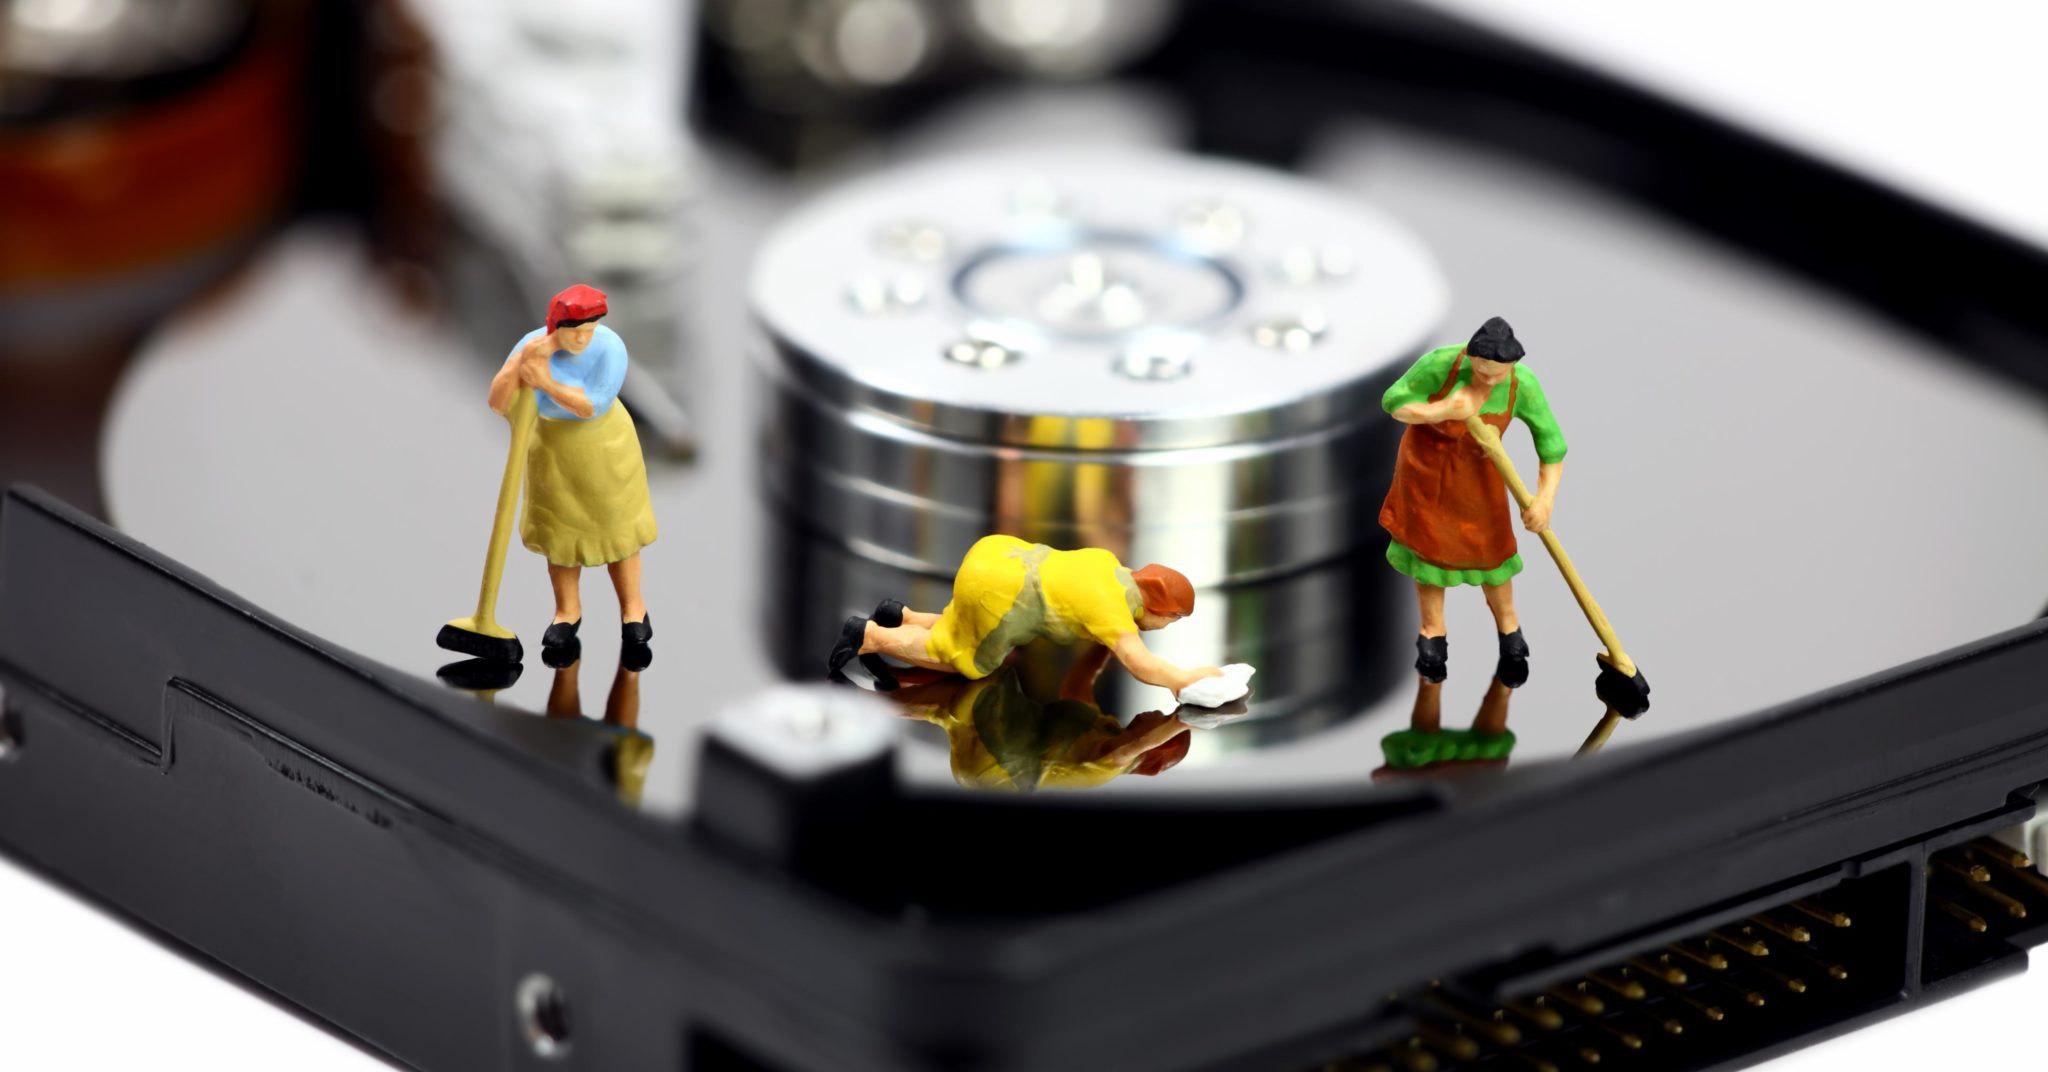 Three miniature maids in colorful outfits cleaning and mopping the surface of a computer hard drive. Representing sprucing up your marketing database.